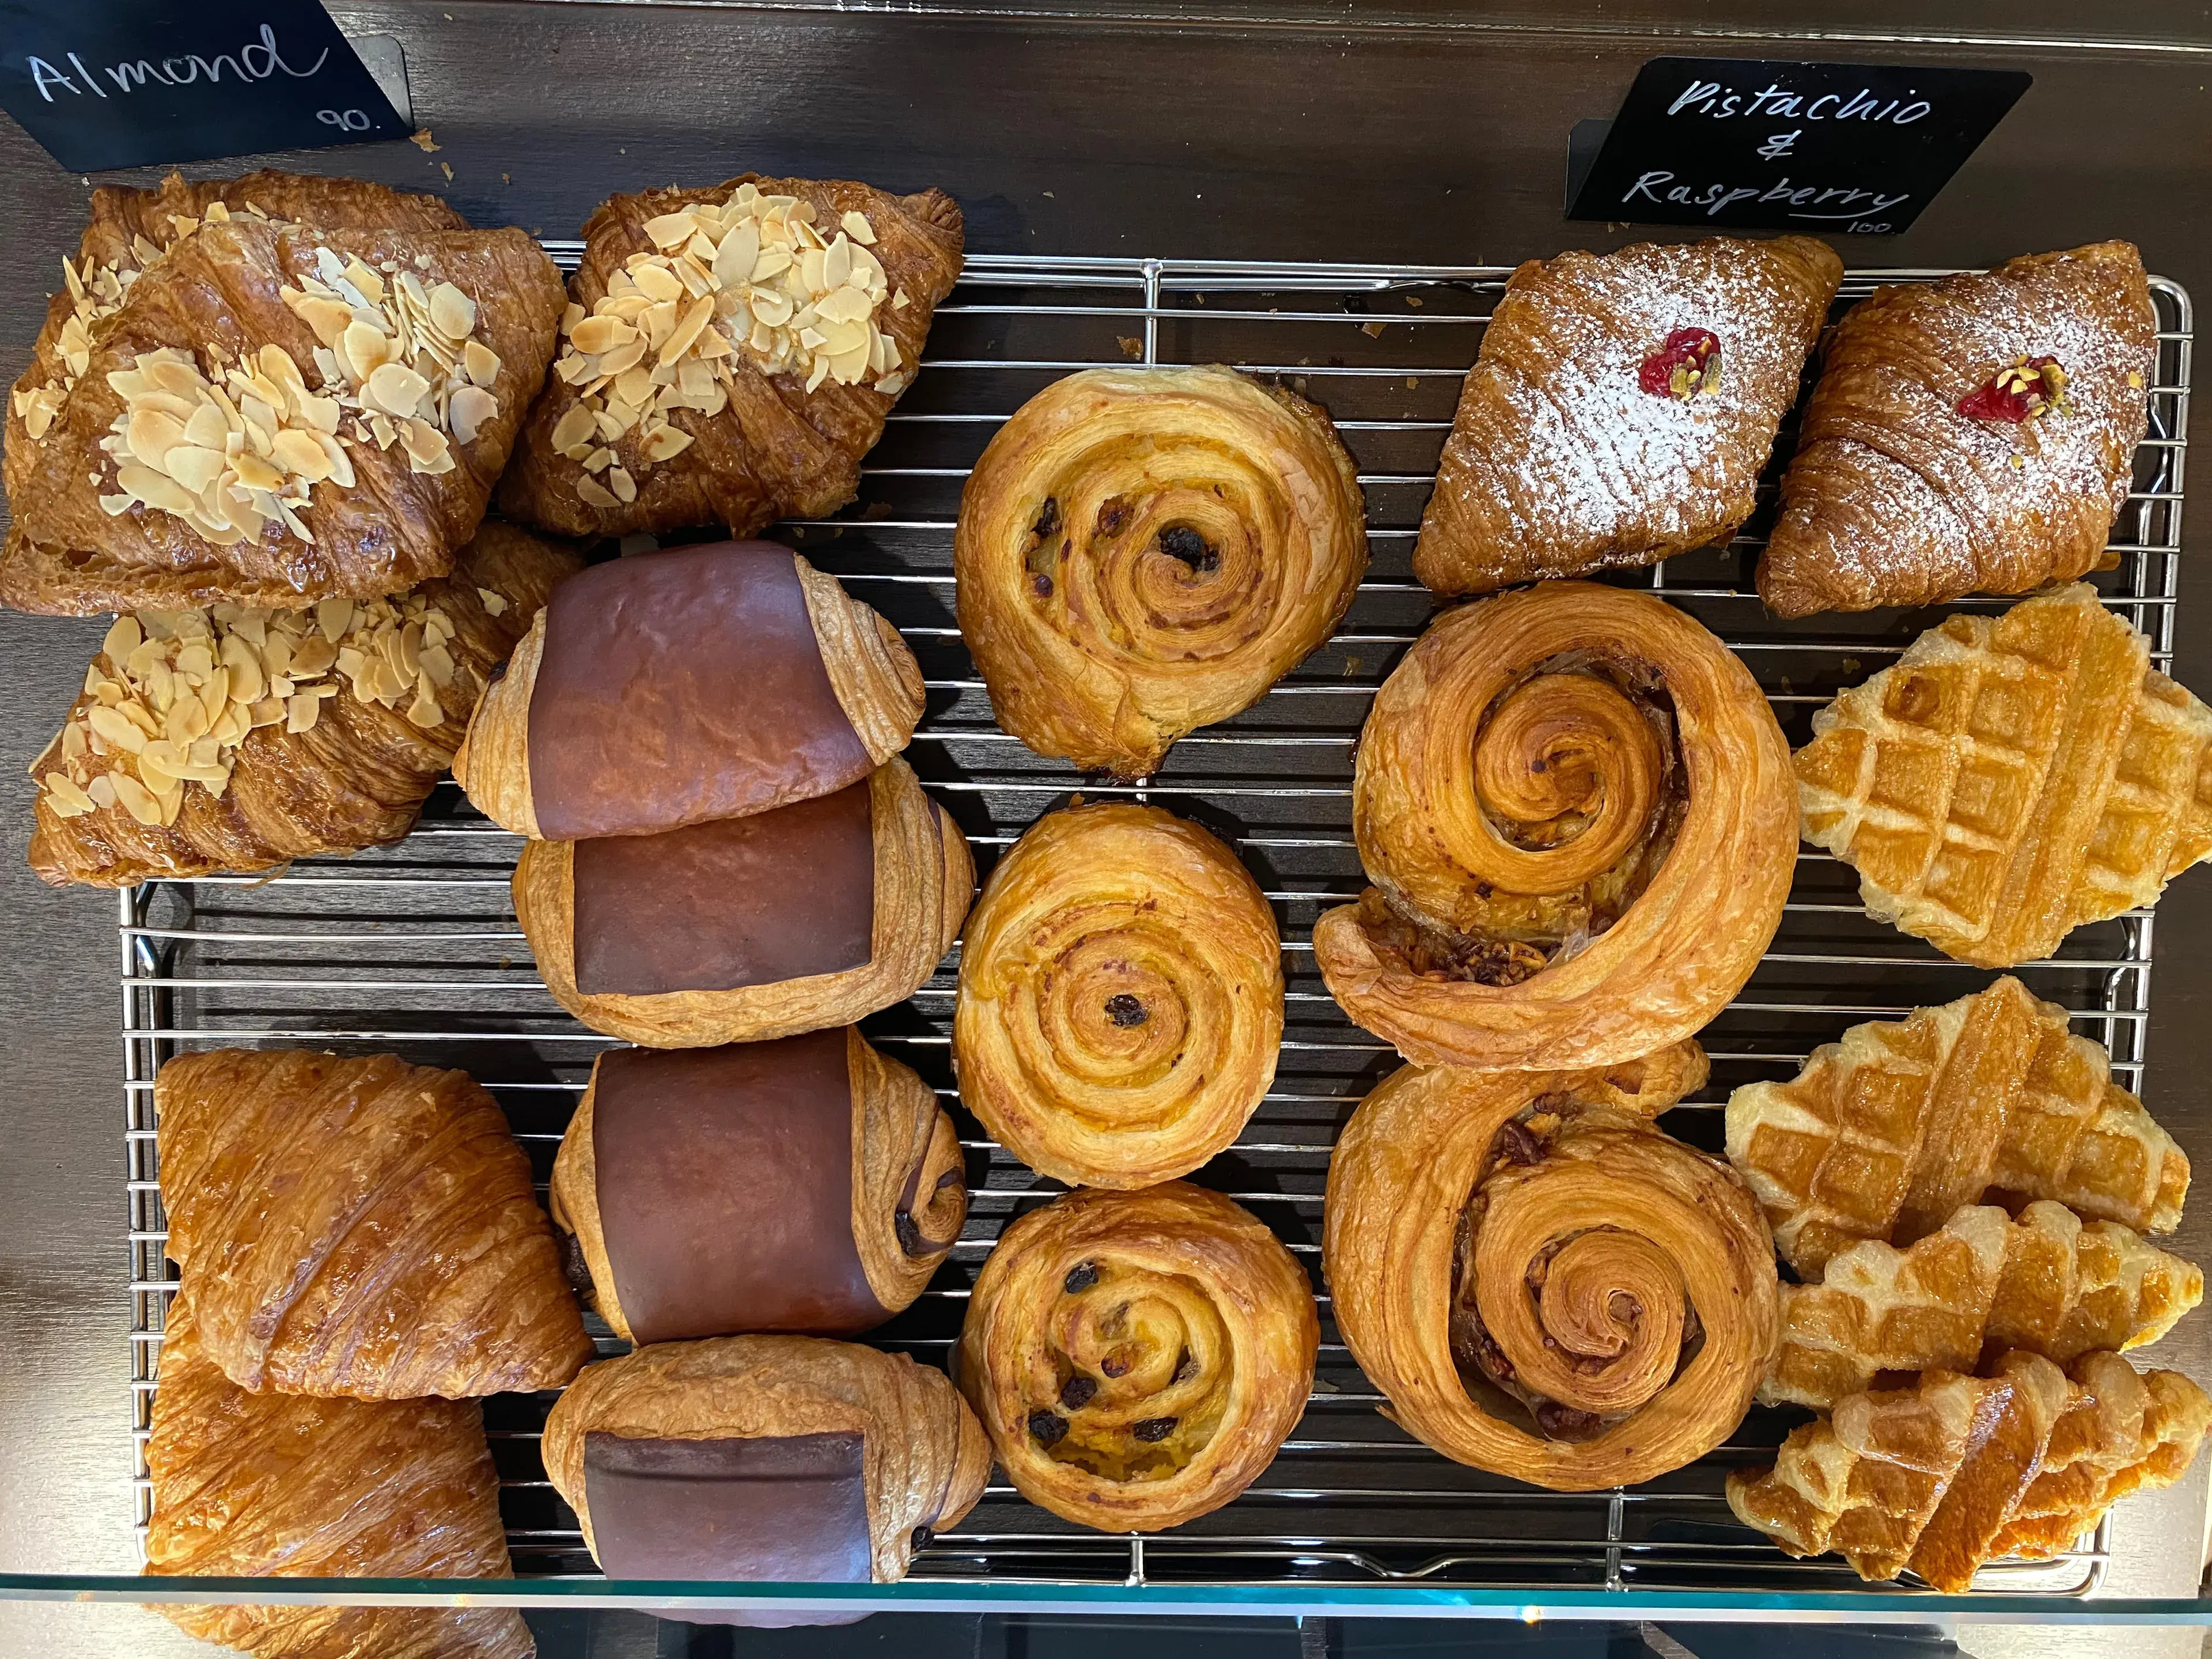 Display shelf of assorted bakery and pastry goods- Croissant and Danish rolls